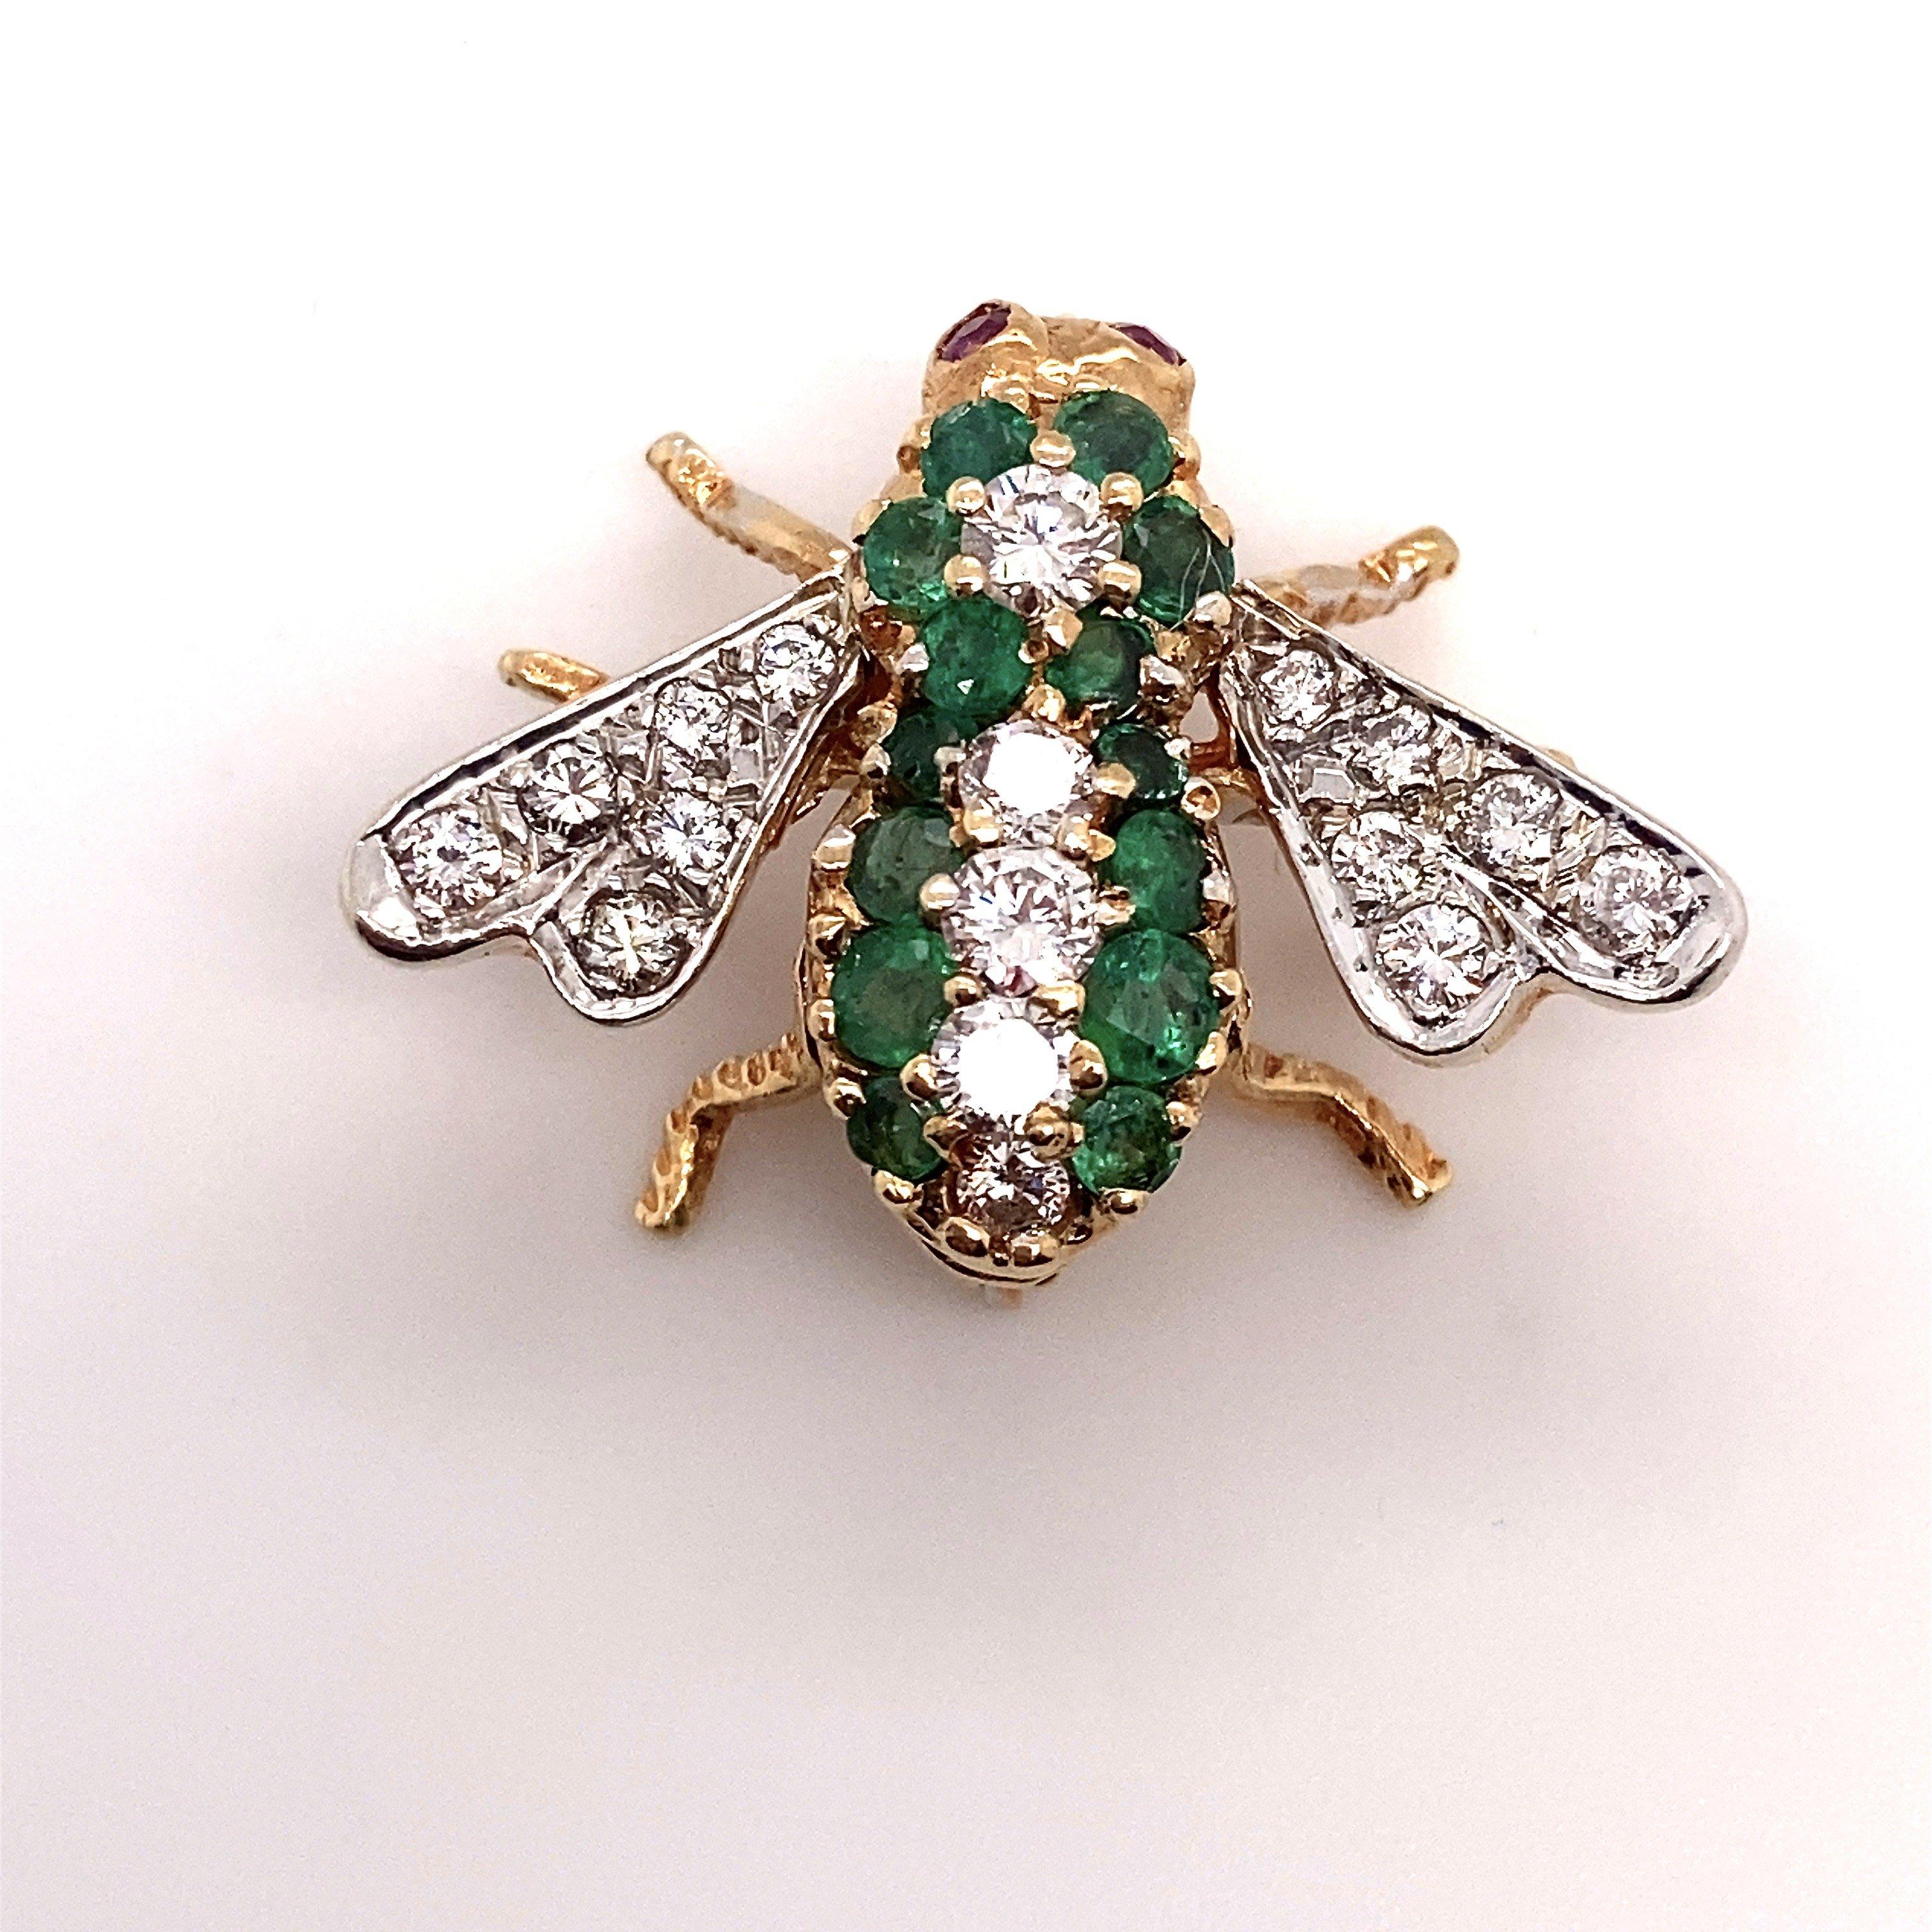 This Rosenthal pin is crafted in 18KT yellow gold with .72CT round diamond & .29CT round emerald with two round ruby eyes. The pin is stamped 18K and HR hallmark. The bee pin measures 19mm x 25mm. The weight is 5.9 grams.  Why we love it: We love